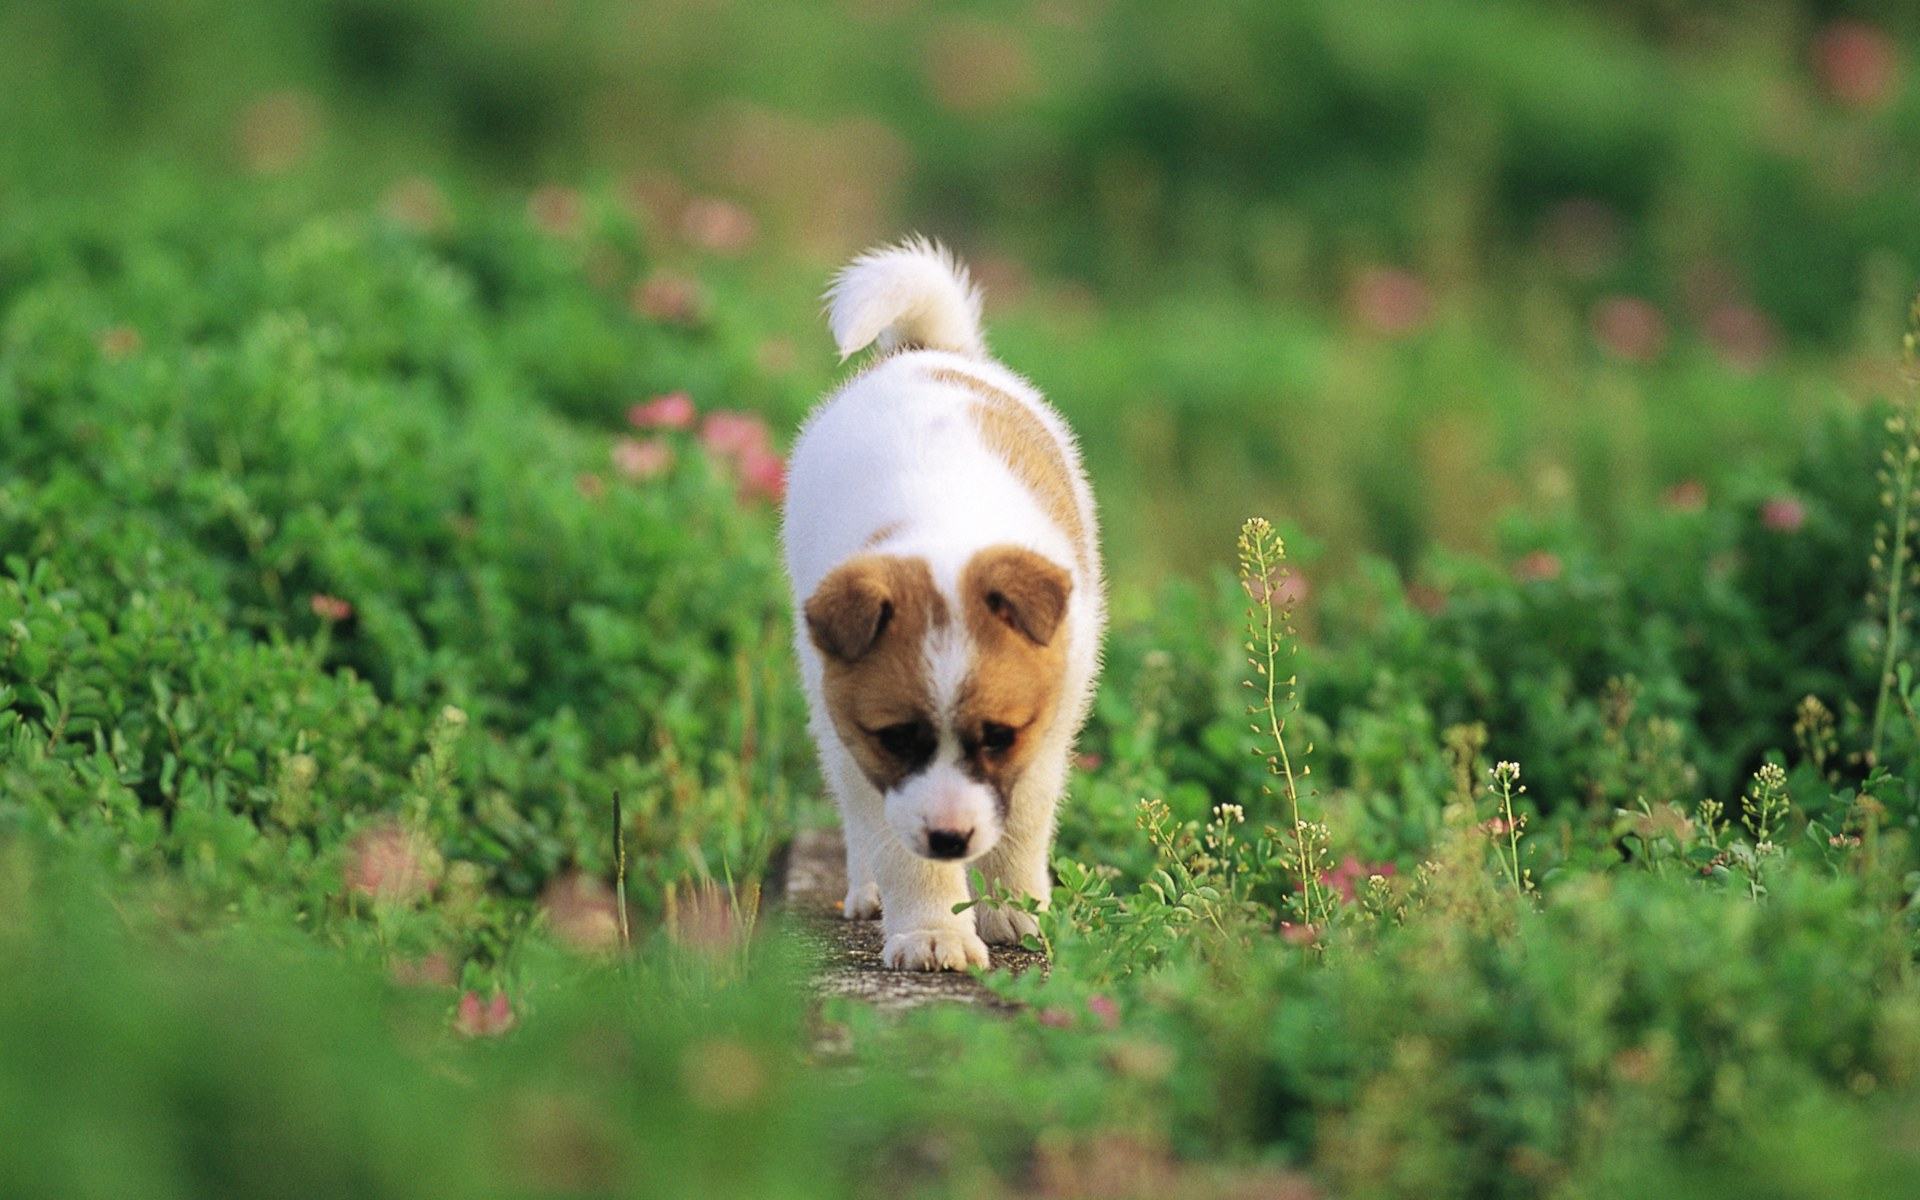 Cute Puppy Dog Wallpapers Image Download - Lovely Dogs Hd - HD Wallpaper 